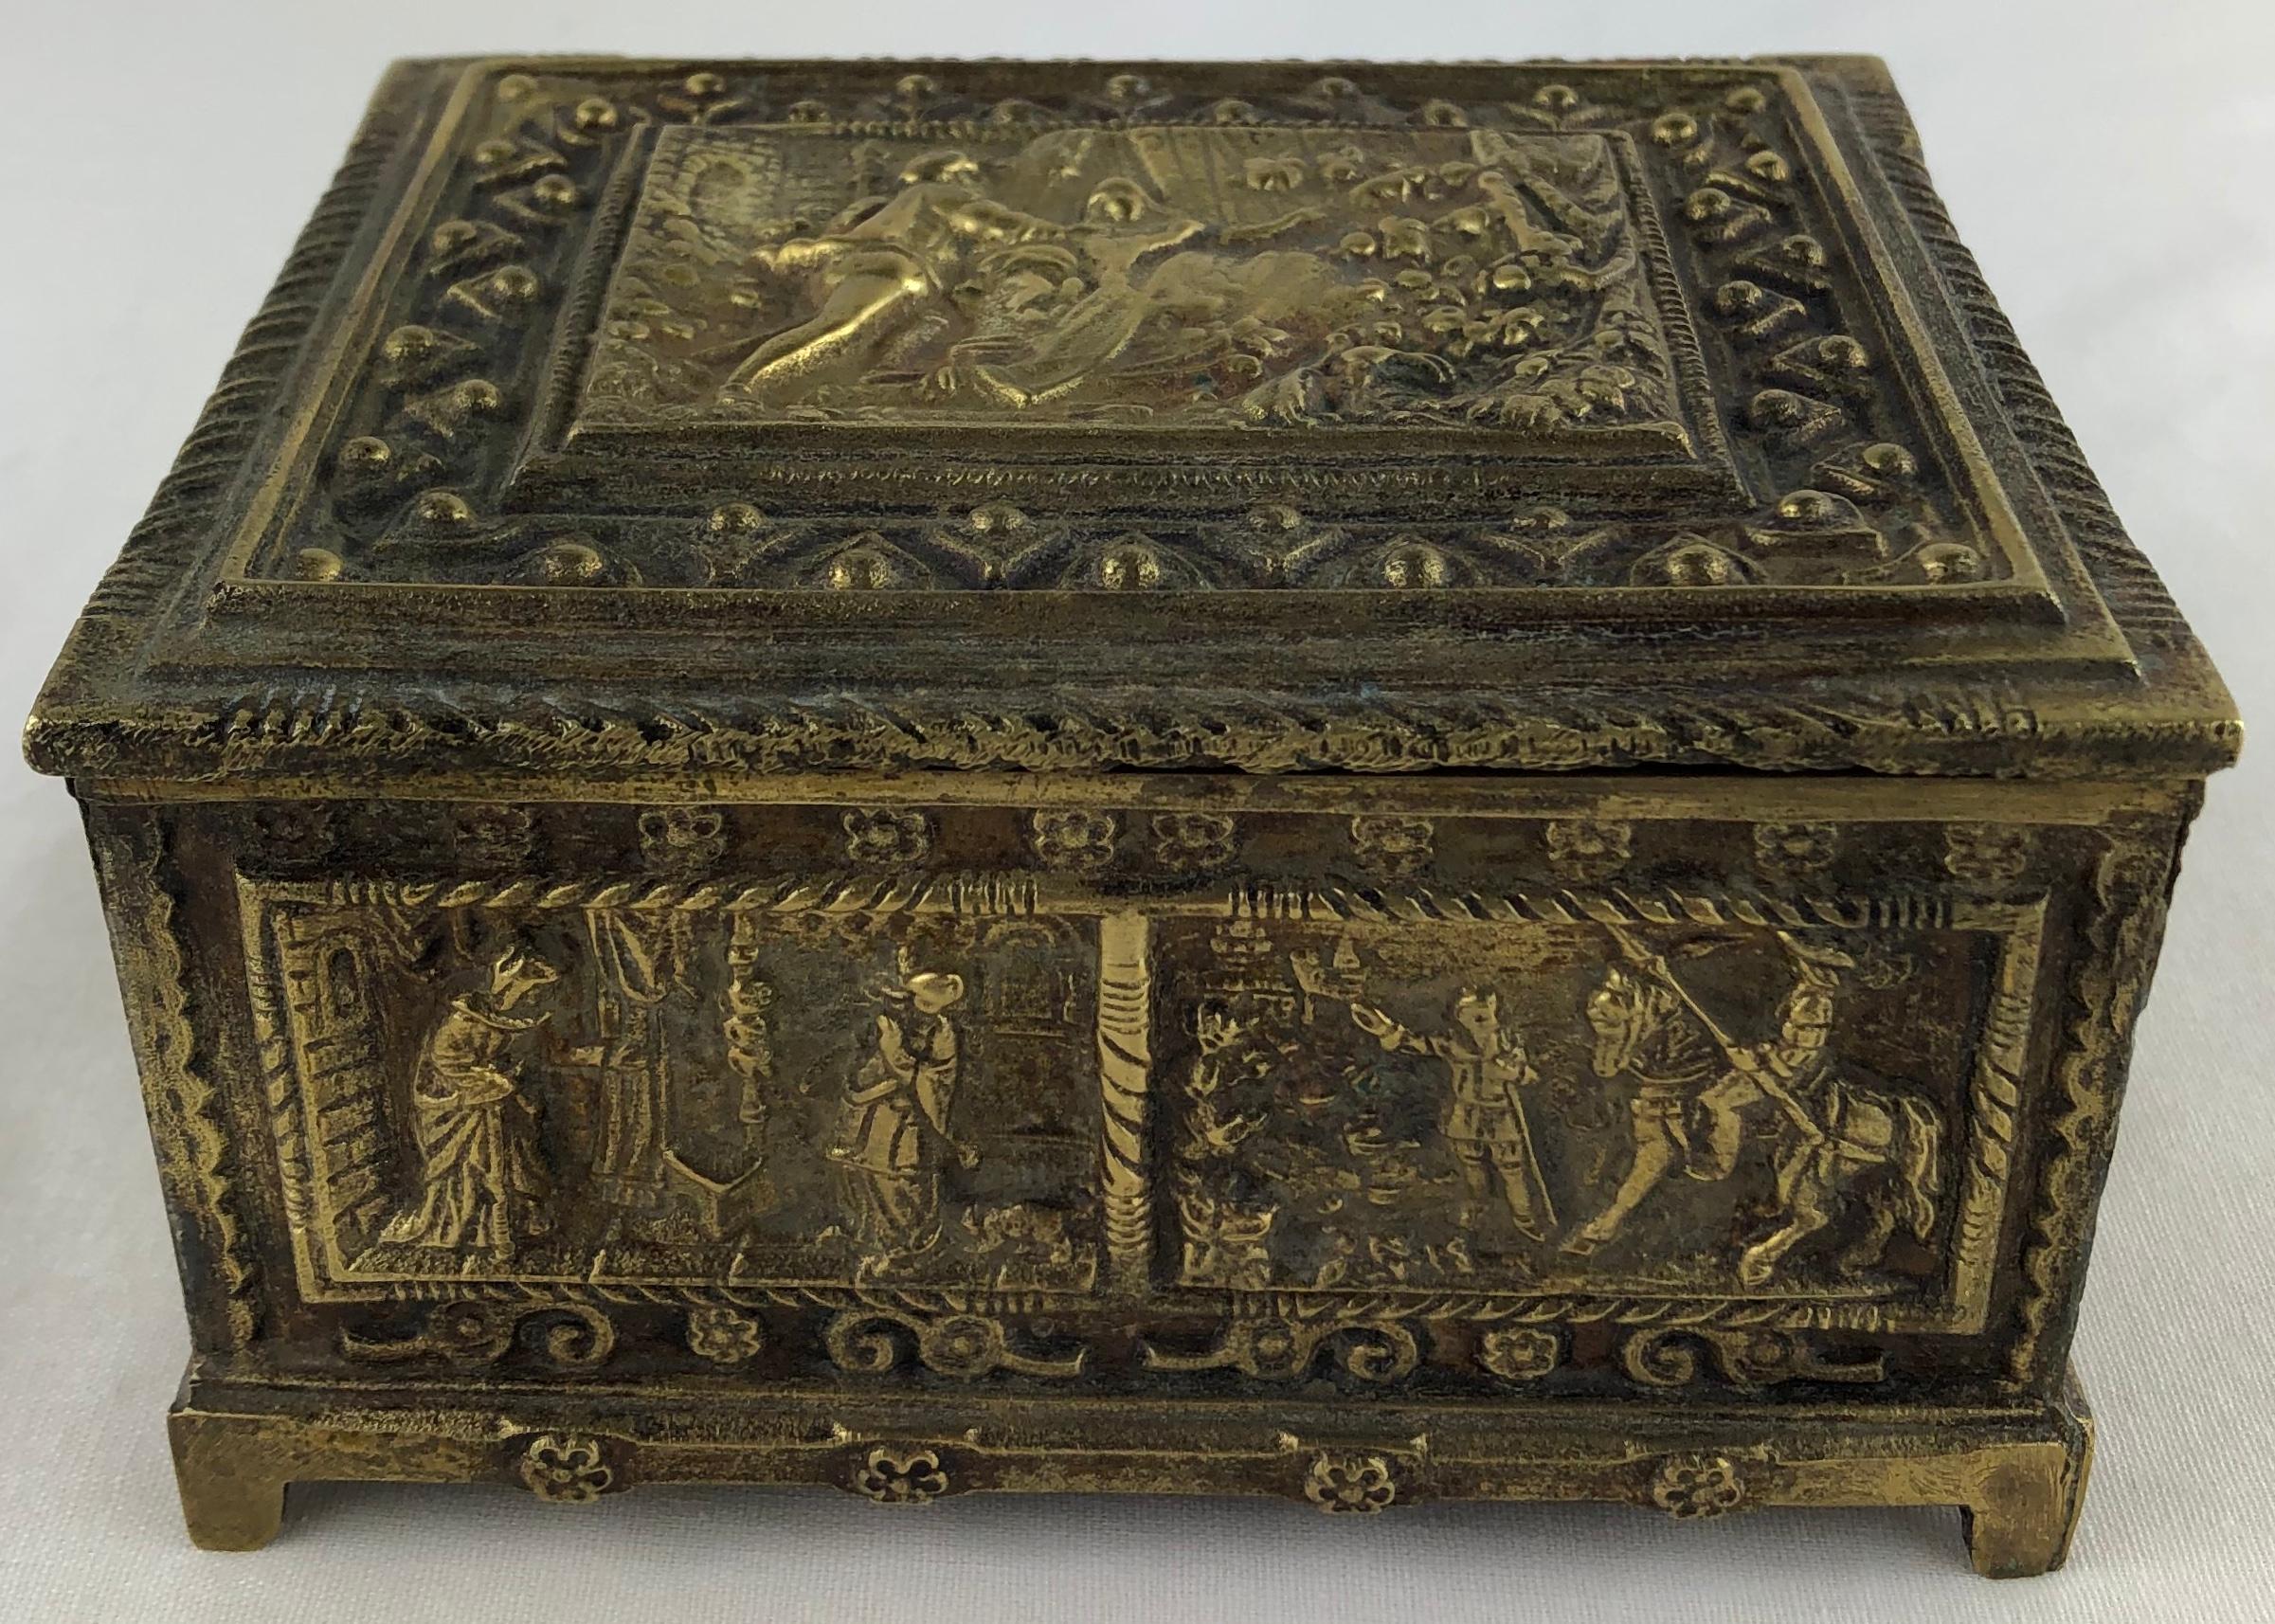 Renaissance French Bronze Jewelry Box with High Reliefs, circa 1880